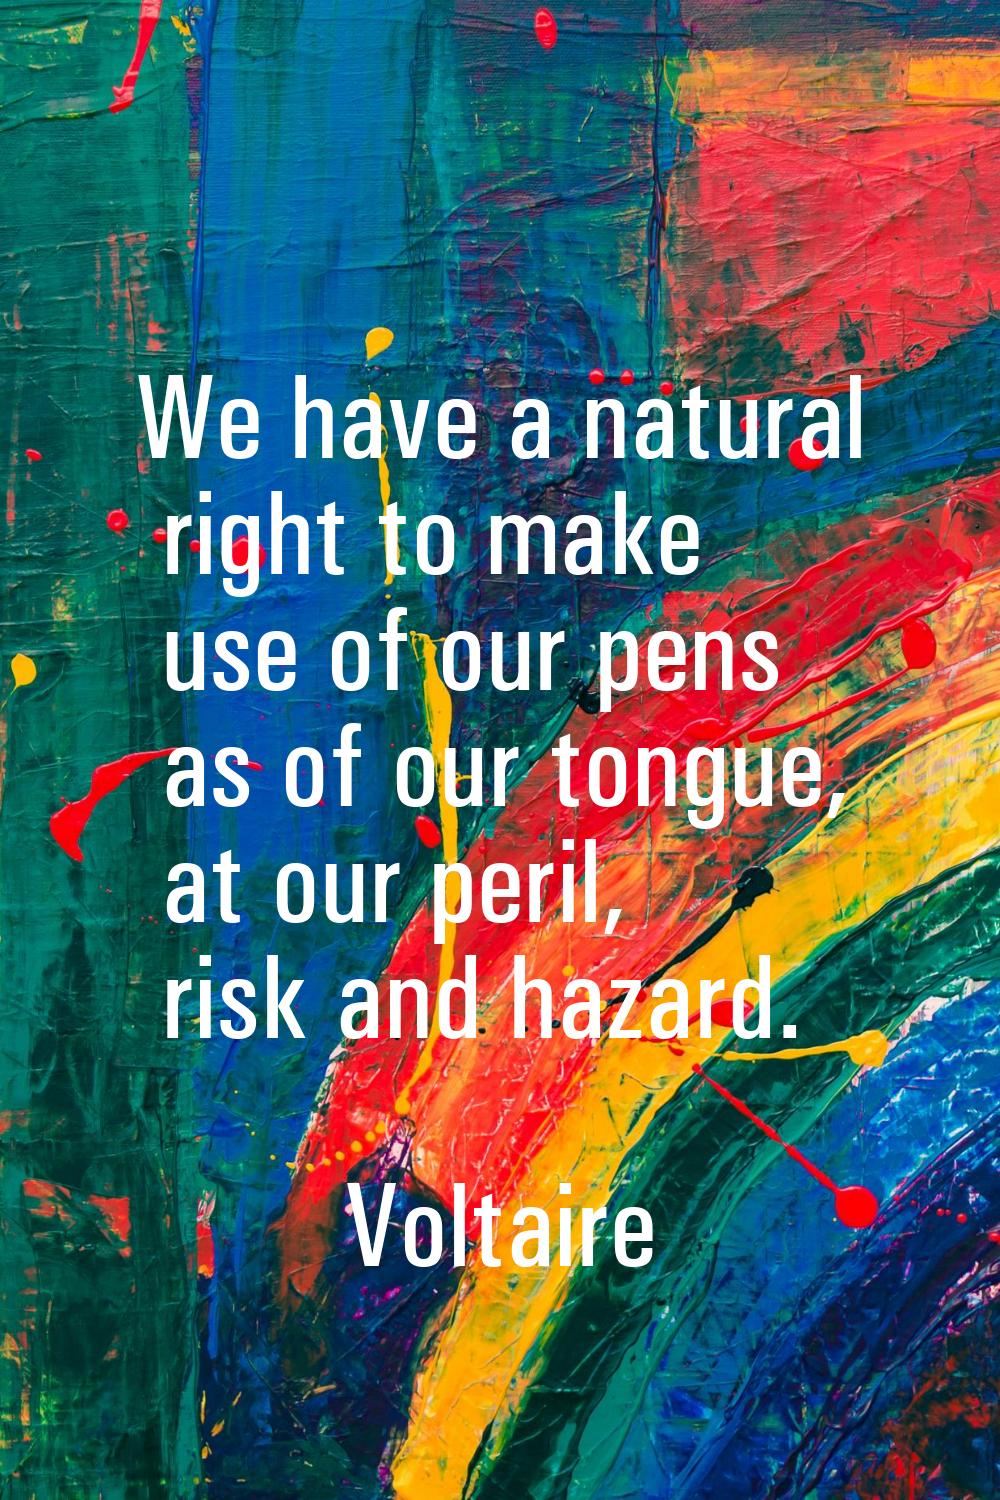 We have a natural right to make use of our pens as of our tongue, at our peril, risk and hazard.